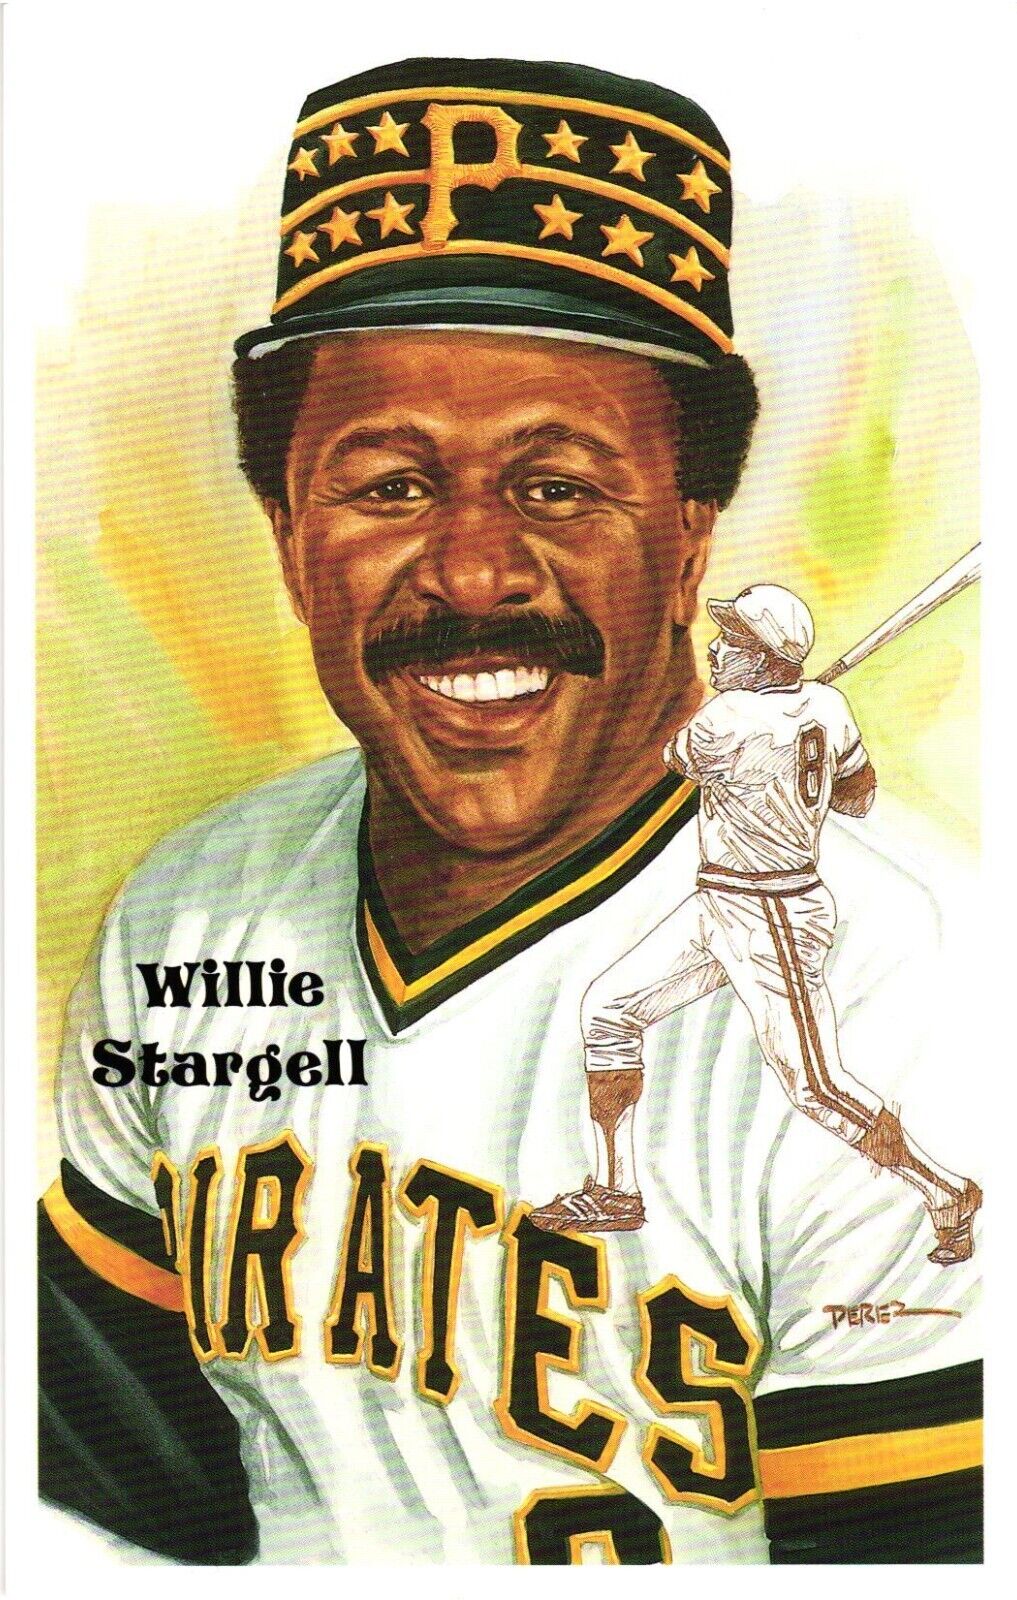 Willie Stargell 1980 Perez-Steele Baseball Hall of Fame Limited Edition Postcard